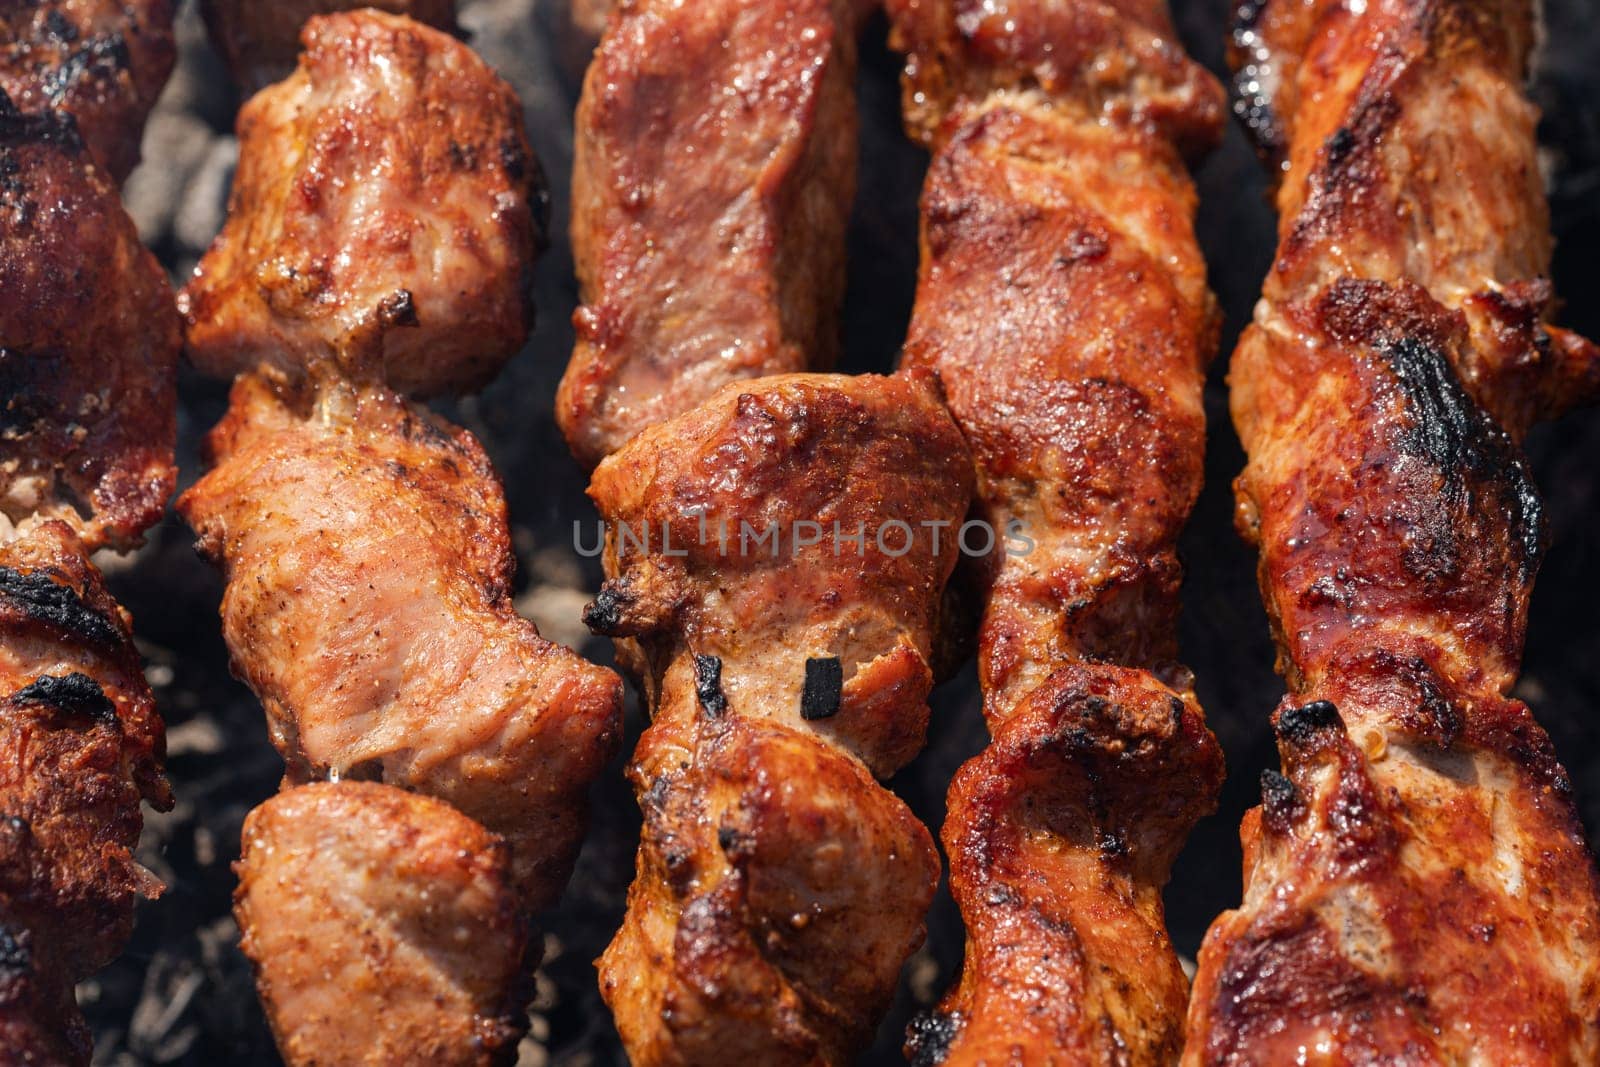 Tasty juicy pork barbecue cooking on metal skewers on outdoors charcoal grill with fragrant fire smoke. Close-up view, cooking during summer picnic. Selective focus on pieces of delicious roast meat.